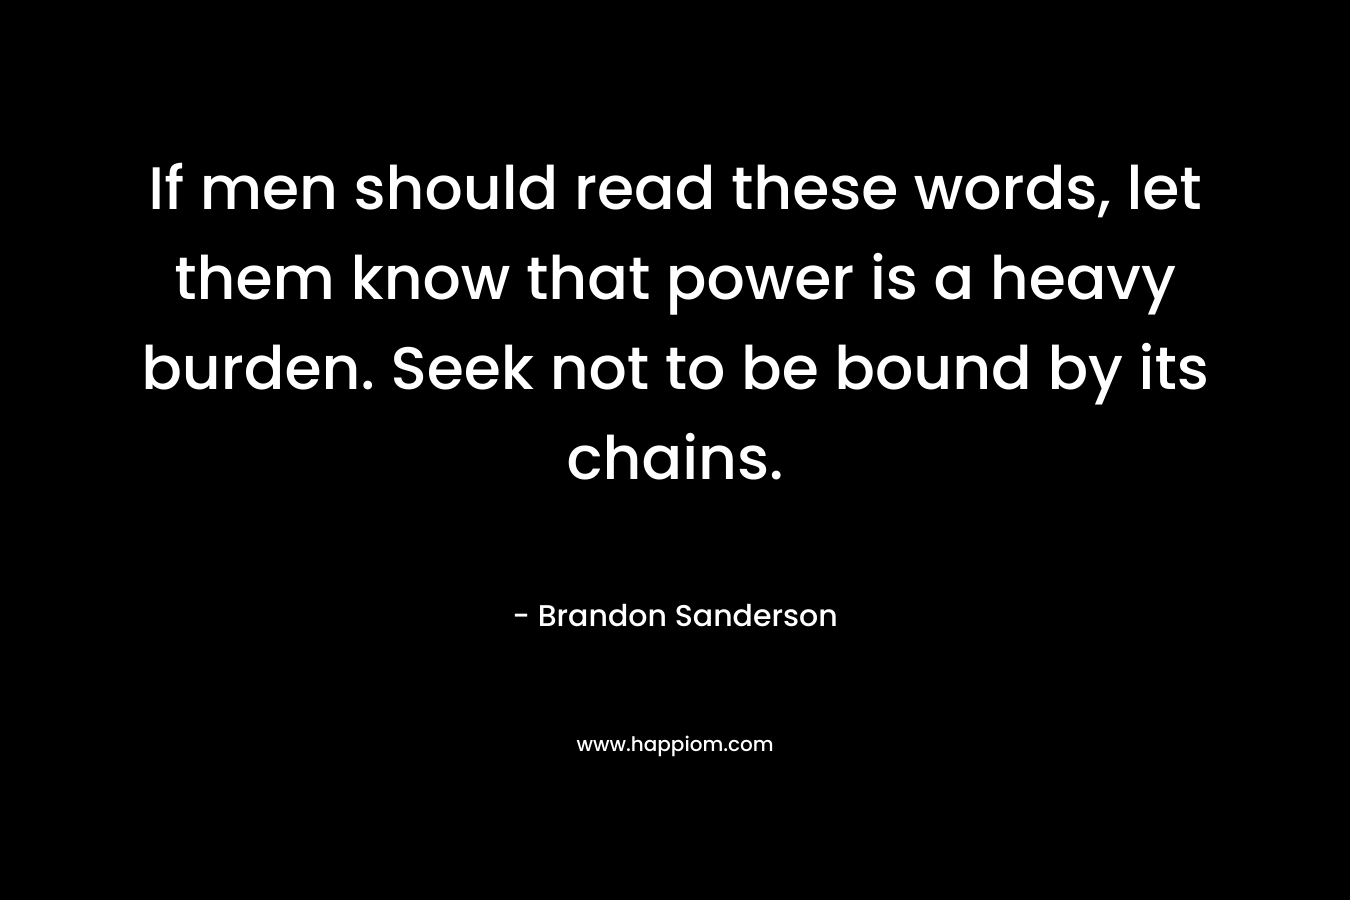 If men should read these words, let them know that power is a heavy burden. Seek not to be bound by its chains. – Brandon Sanderson